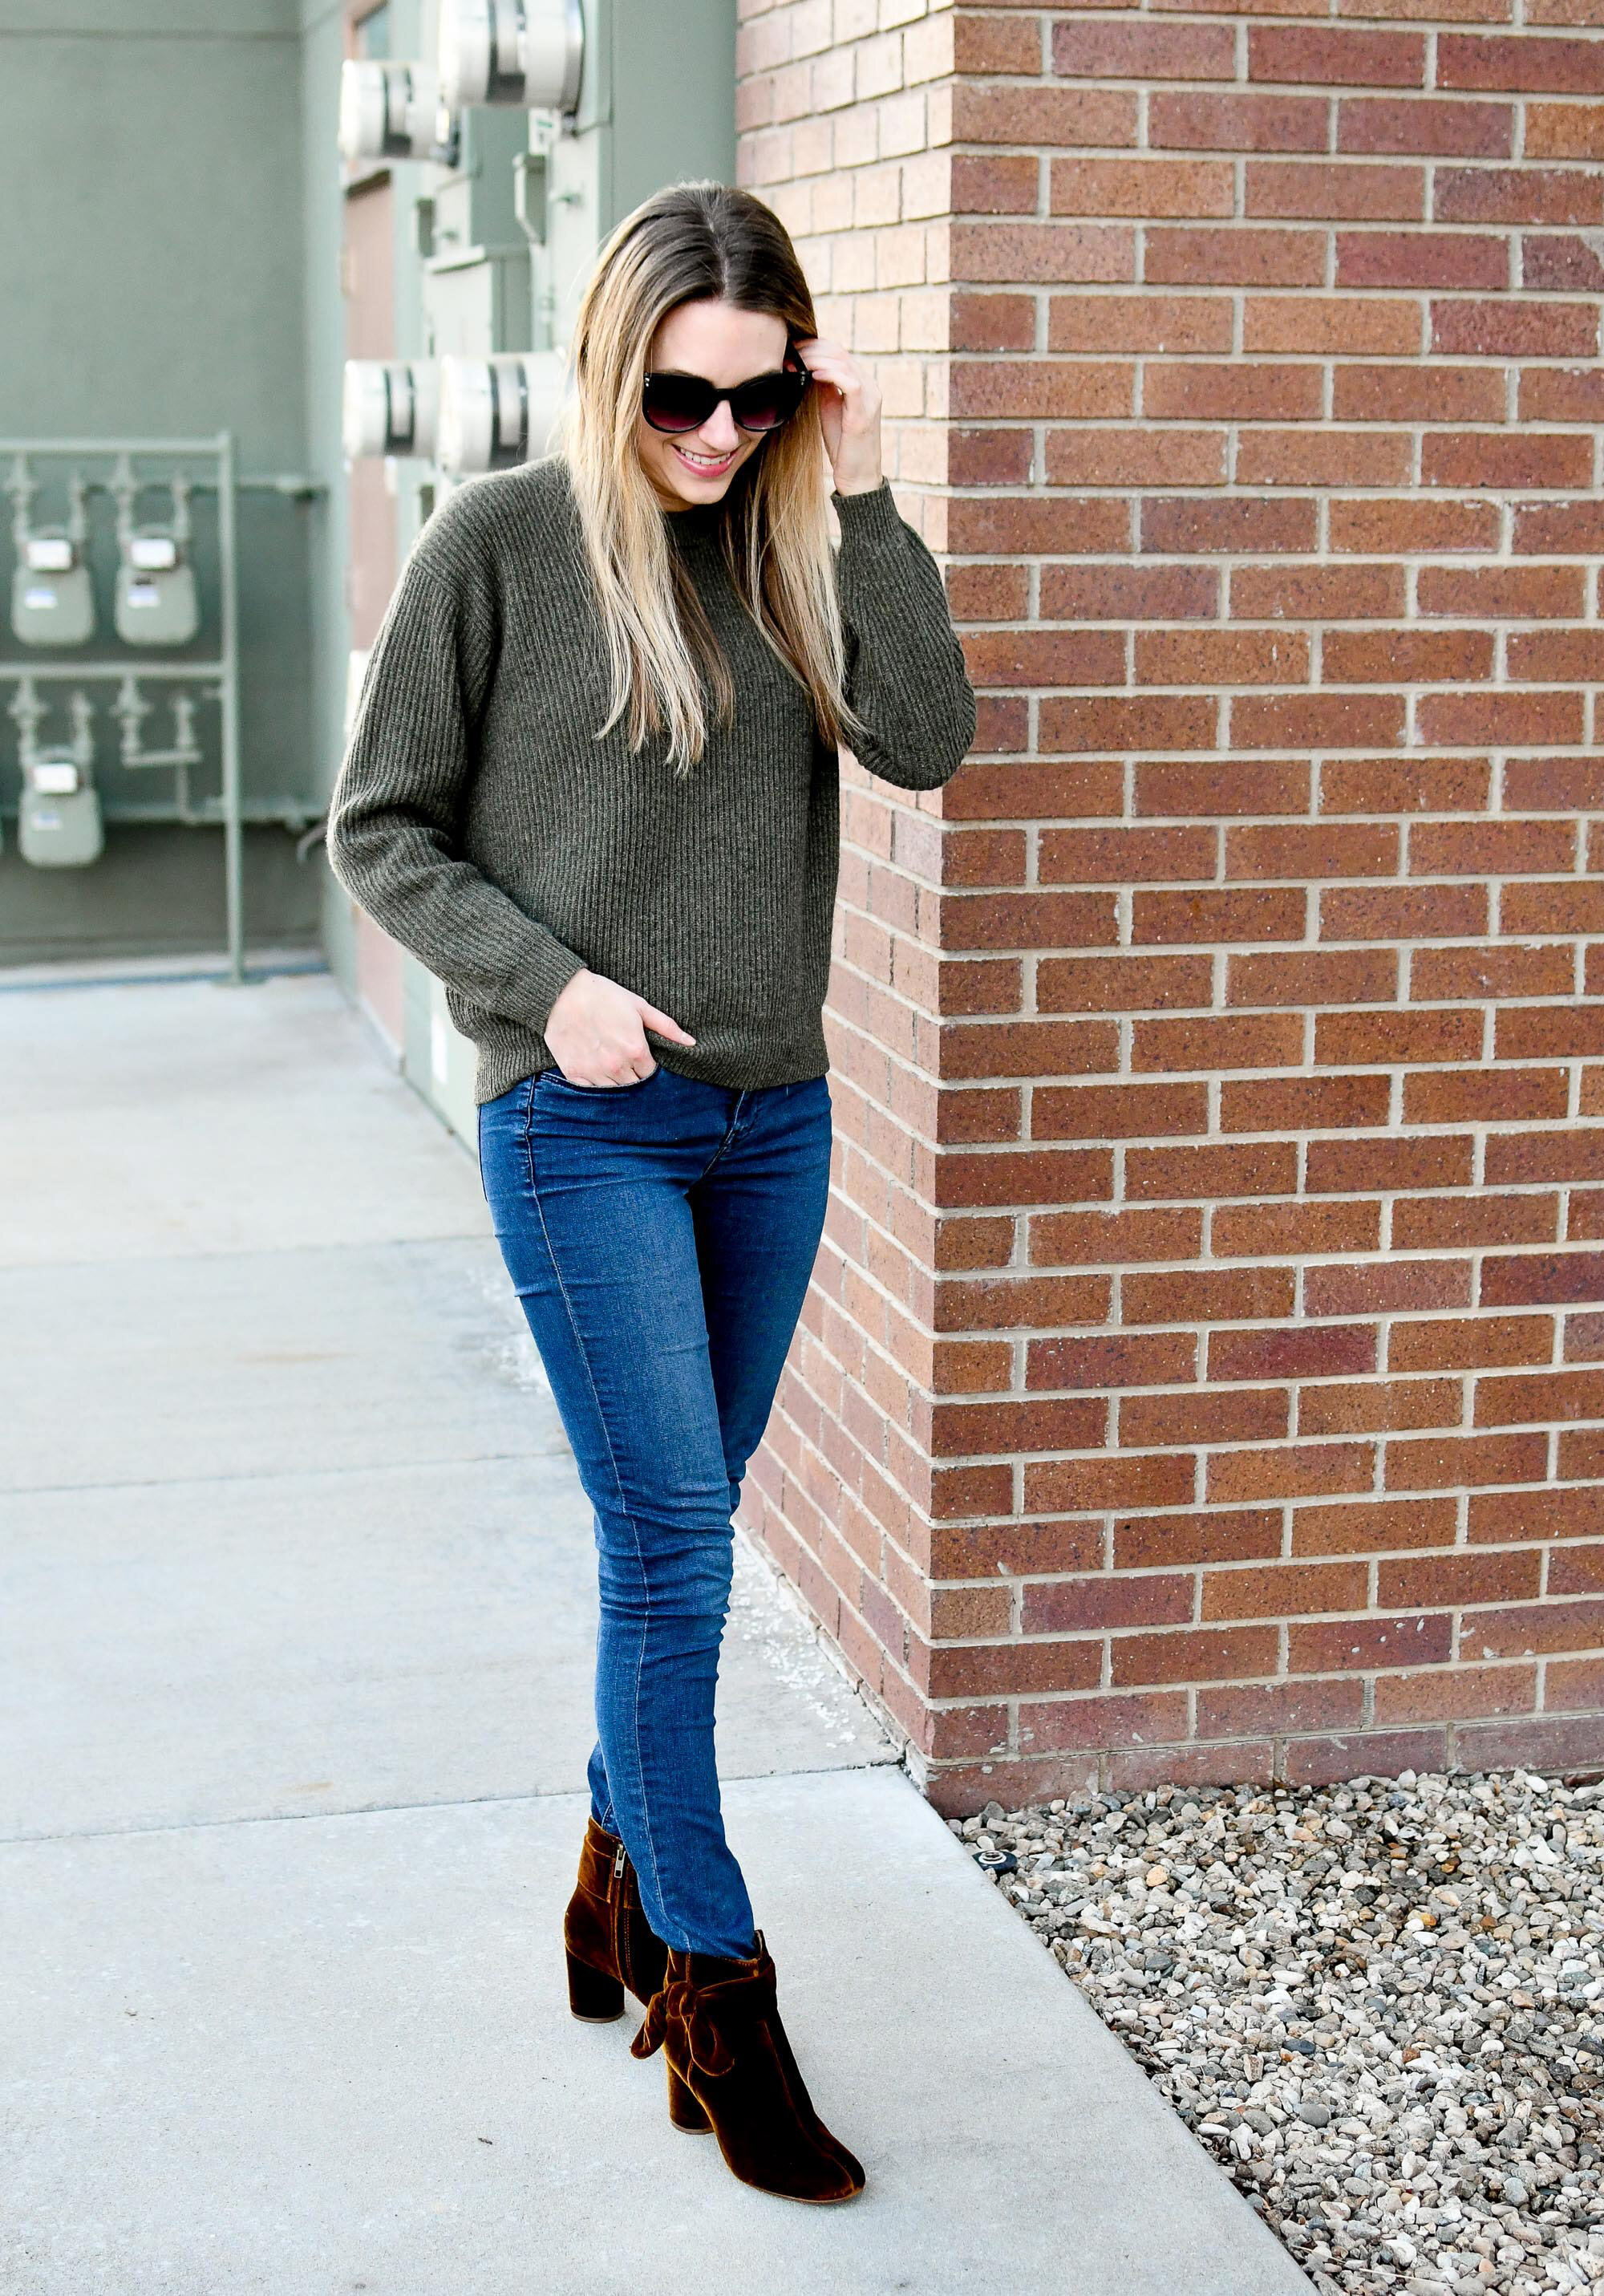 Favorite outfit: Ankle boot addict — Cotton Cashmere Cat Hair